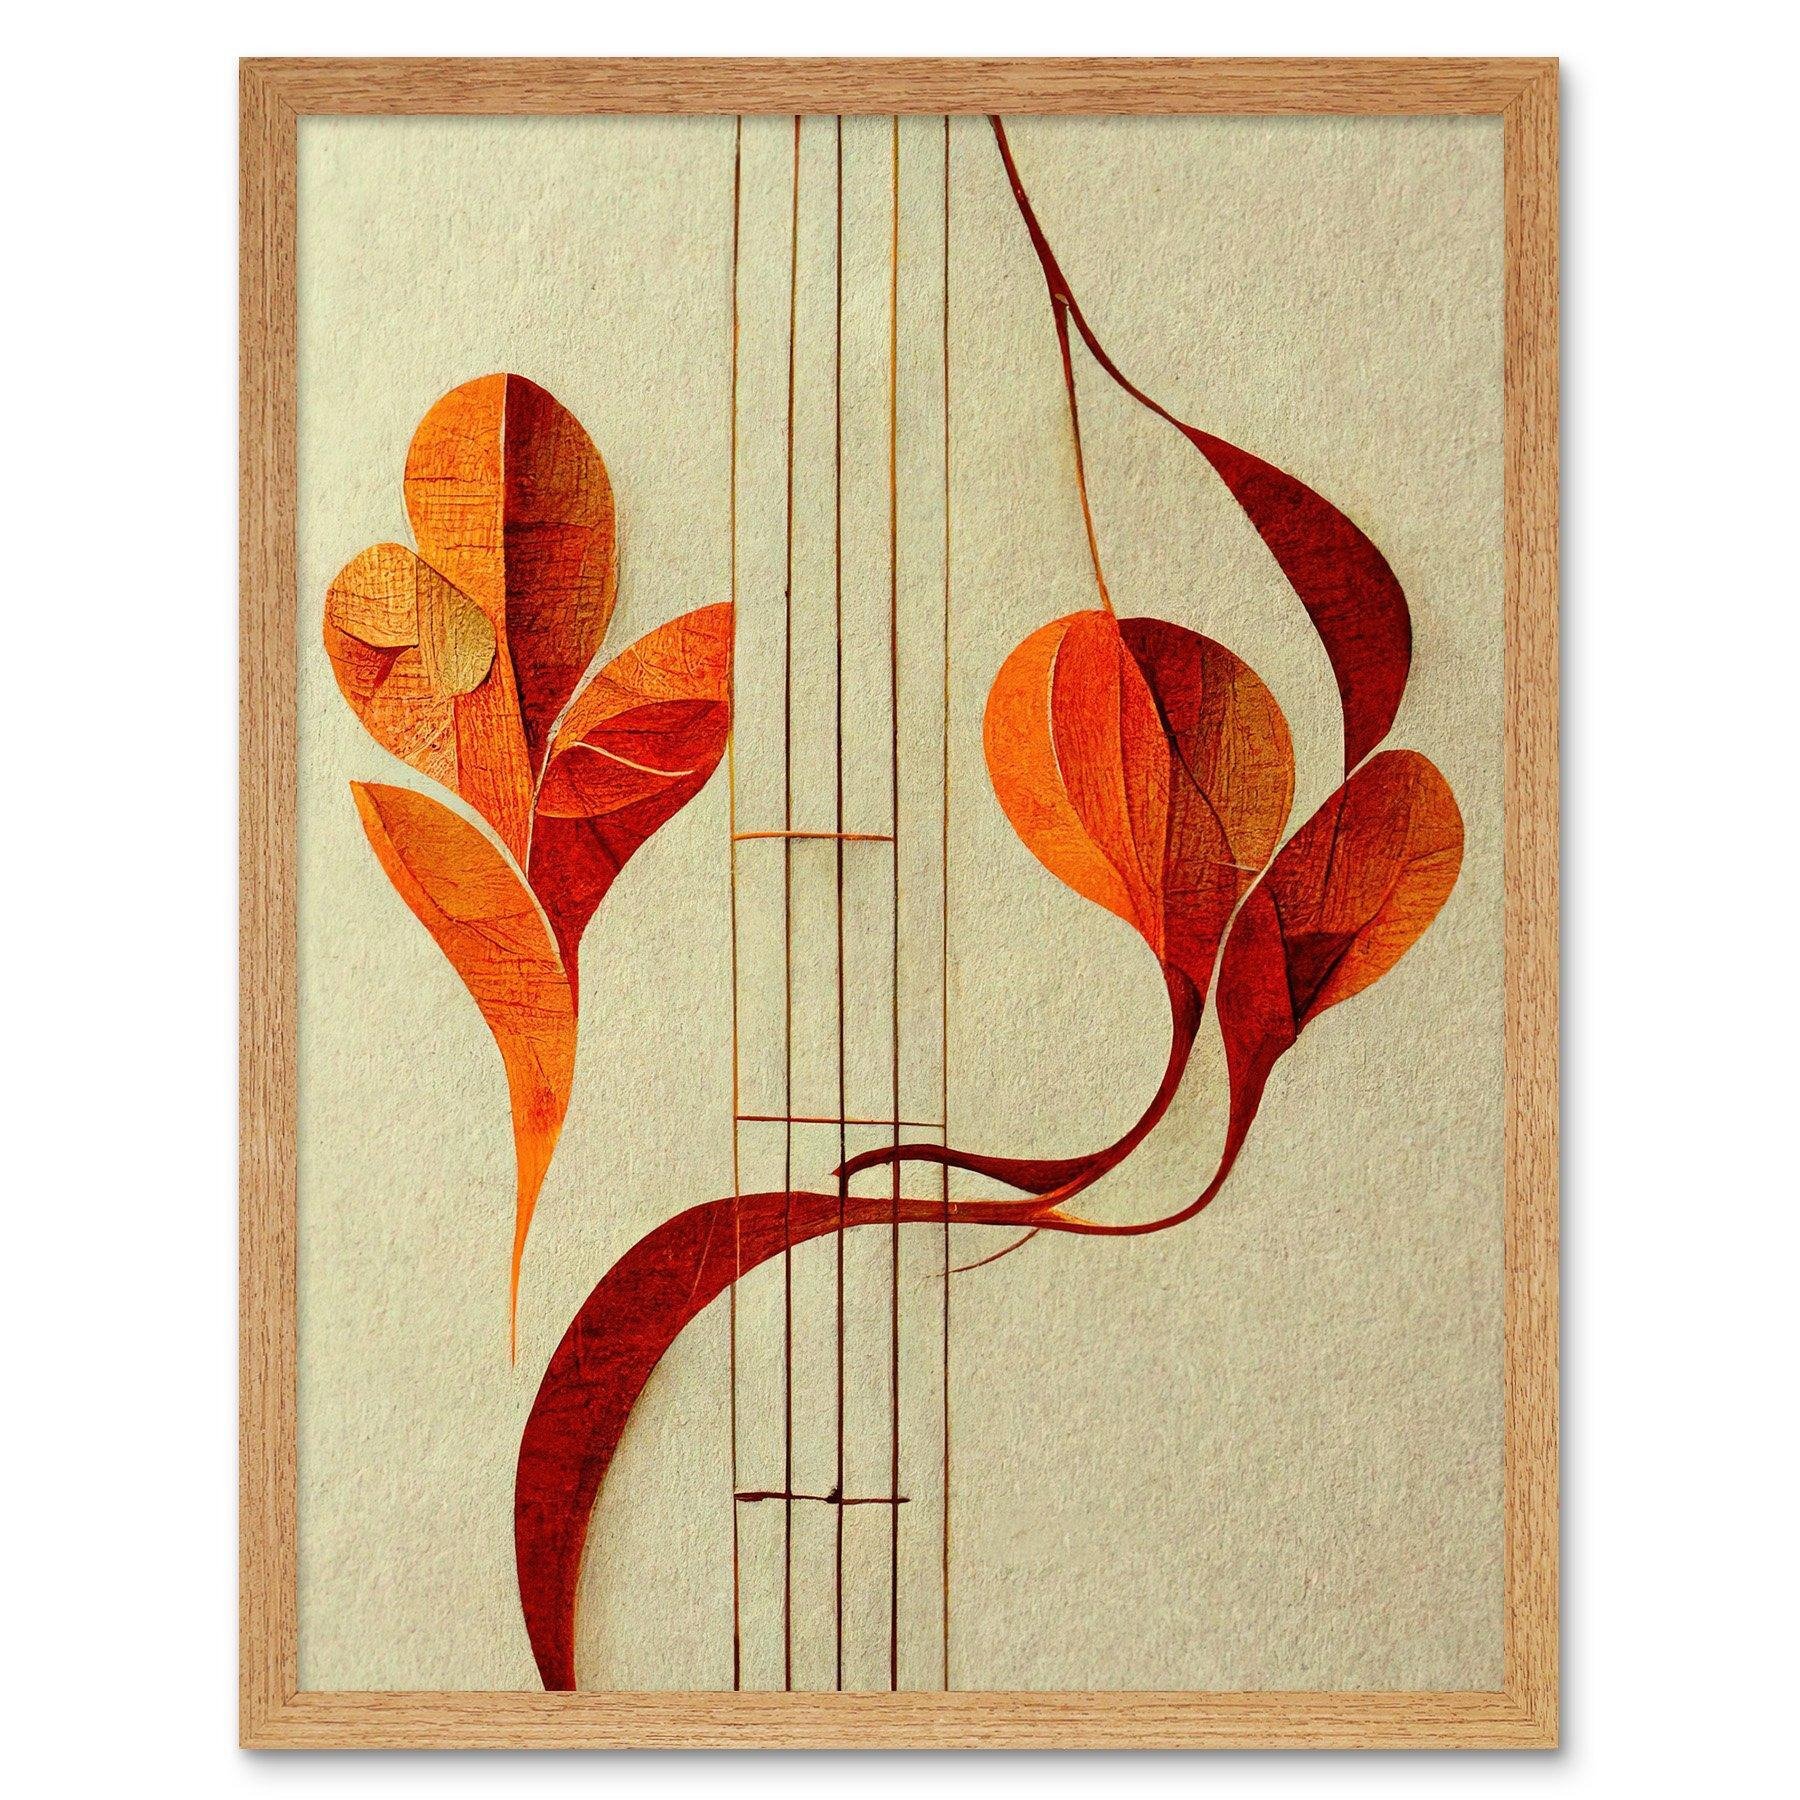 Modern Abstract Orange Autumn Leaf and Musical Notes Music Staff Lines Art Print Framed Poster Wall Decor 12x16 inch - image 1